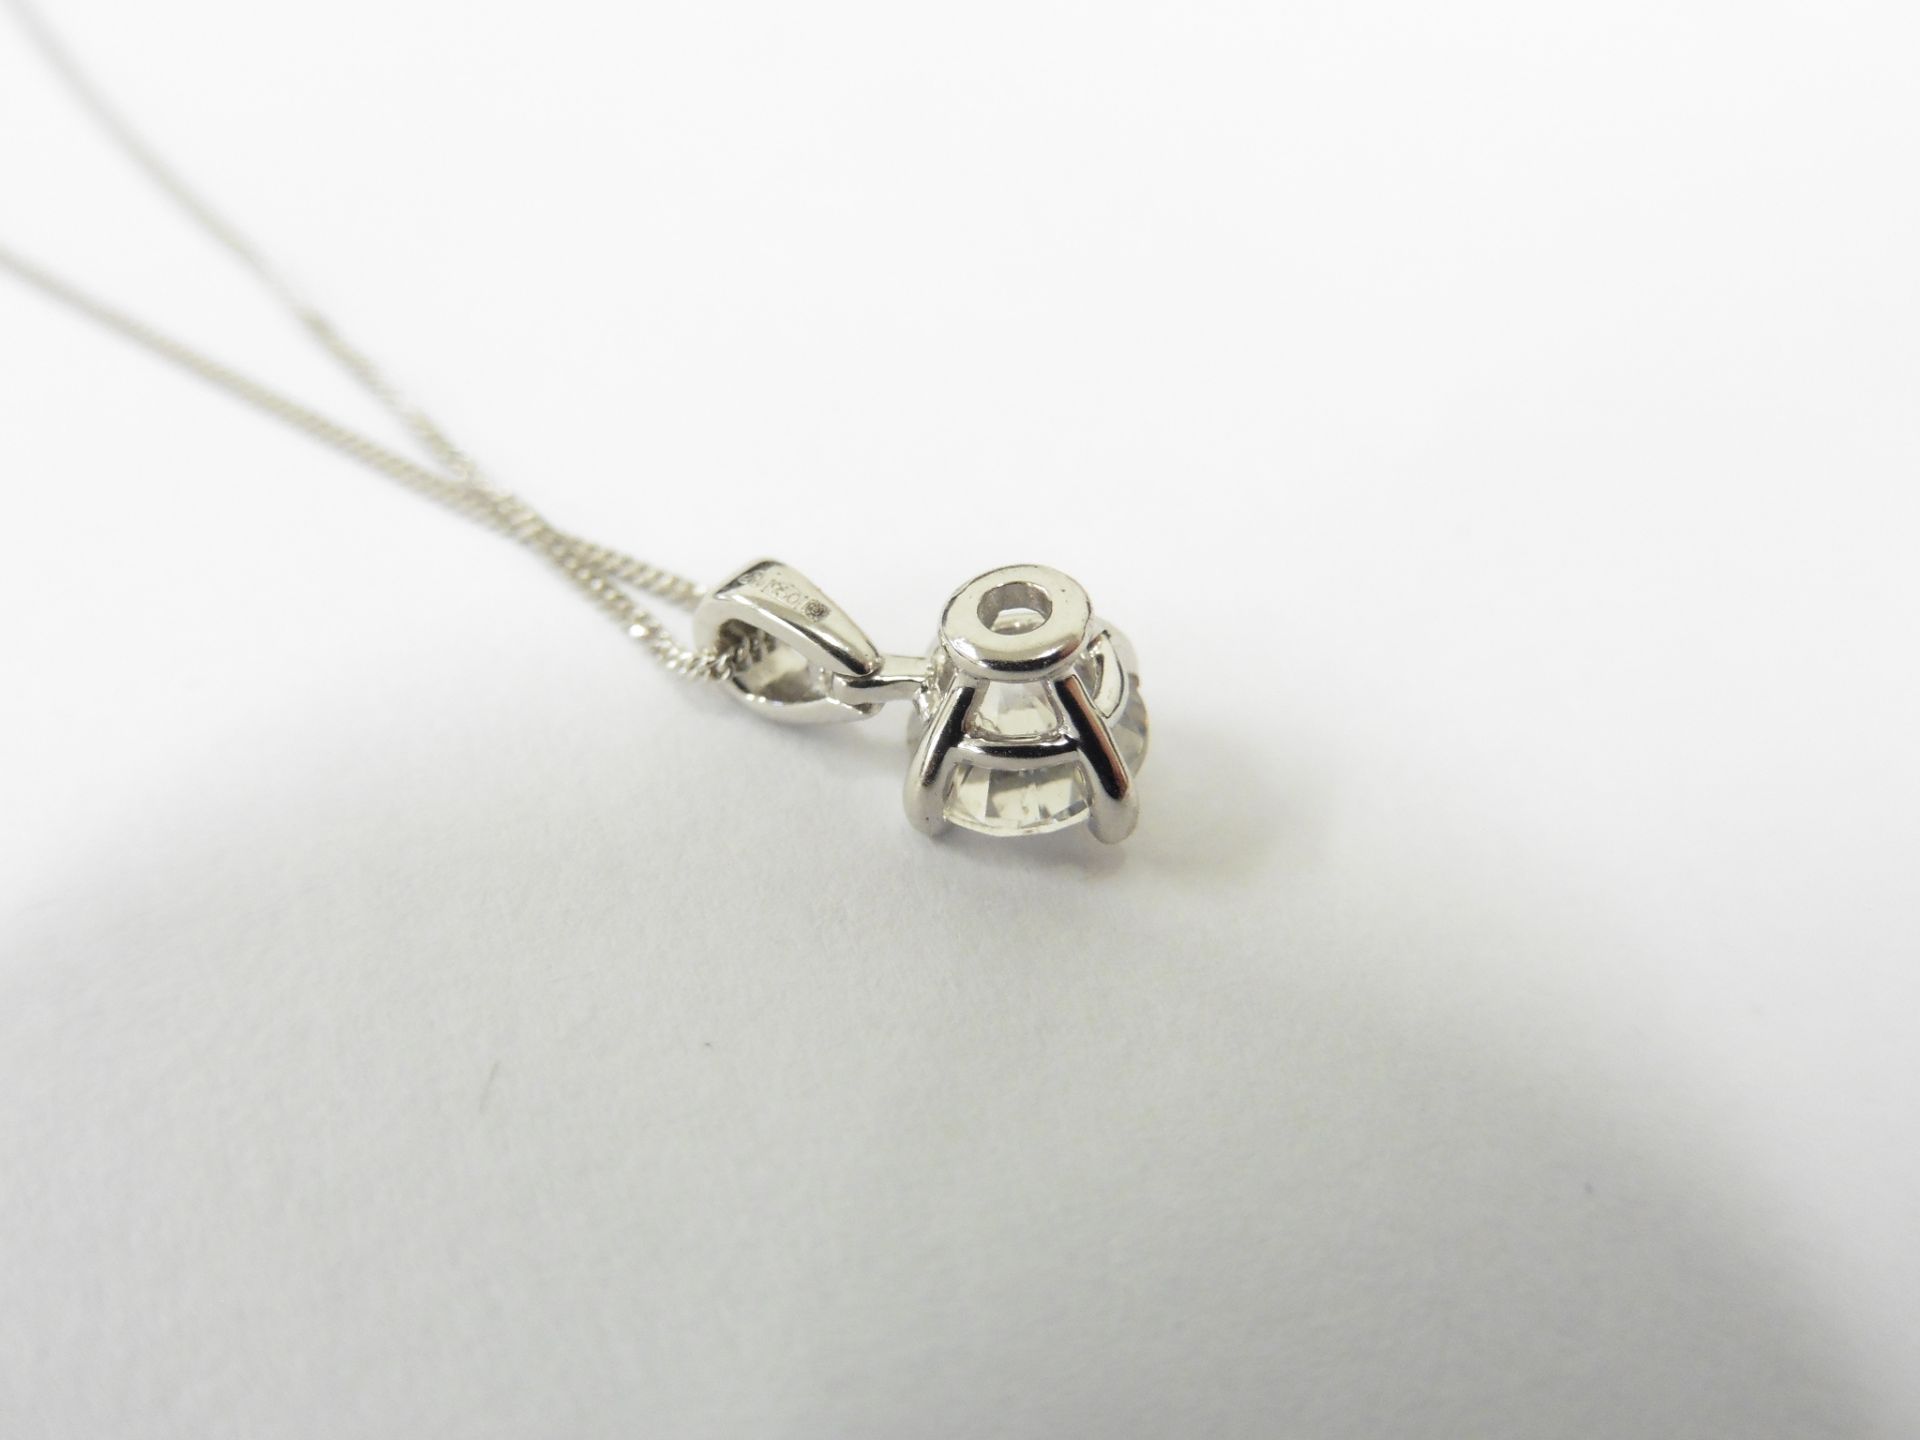 0.50Ct Diamond Solitaire Pendant Set In A Platinum 4 Claw Setting. - Image 3 of 3